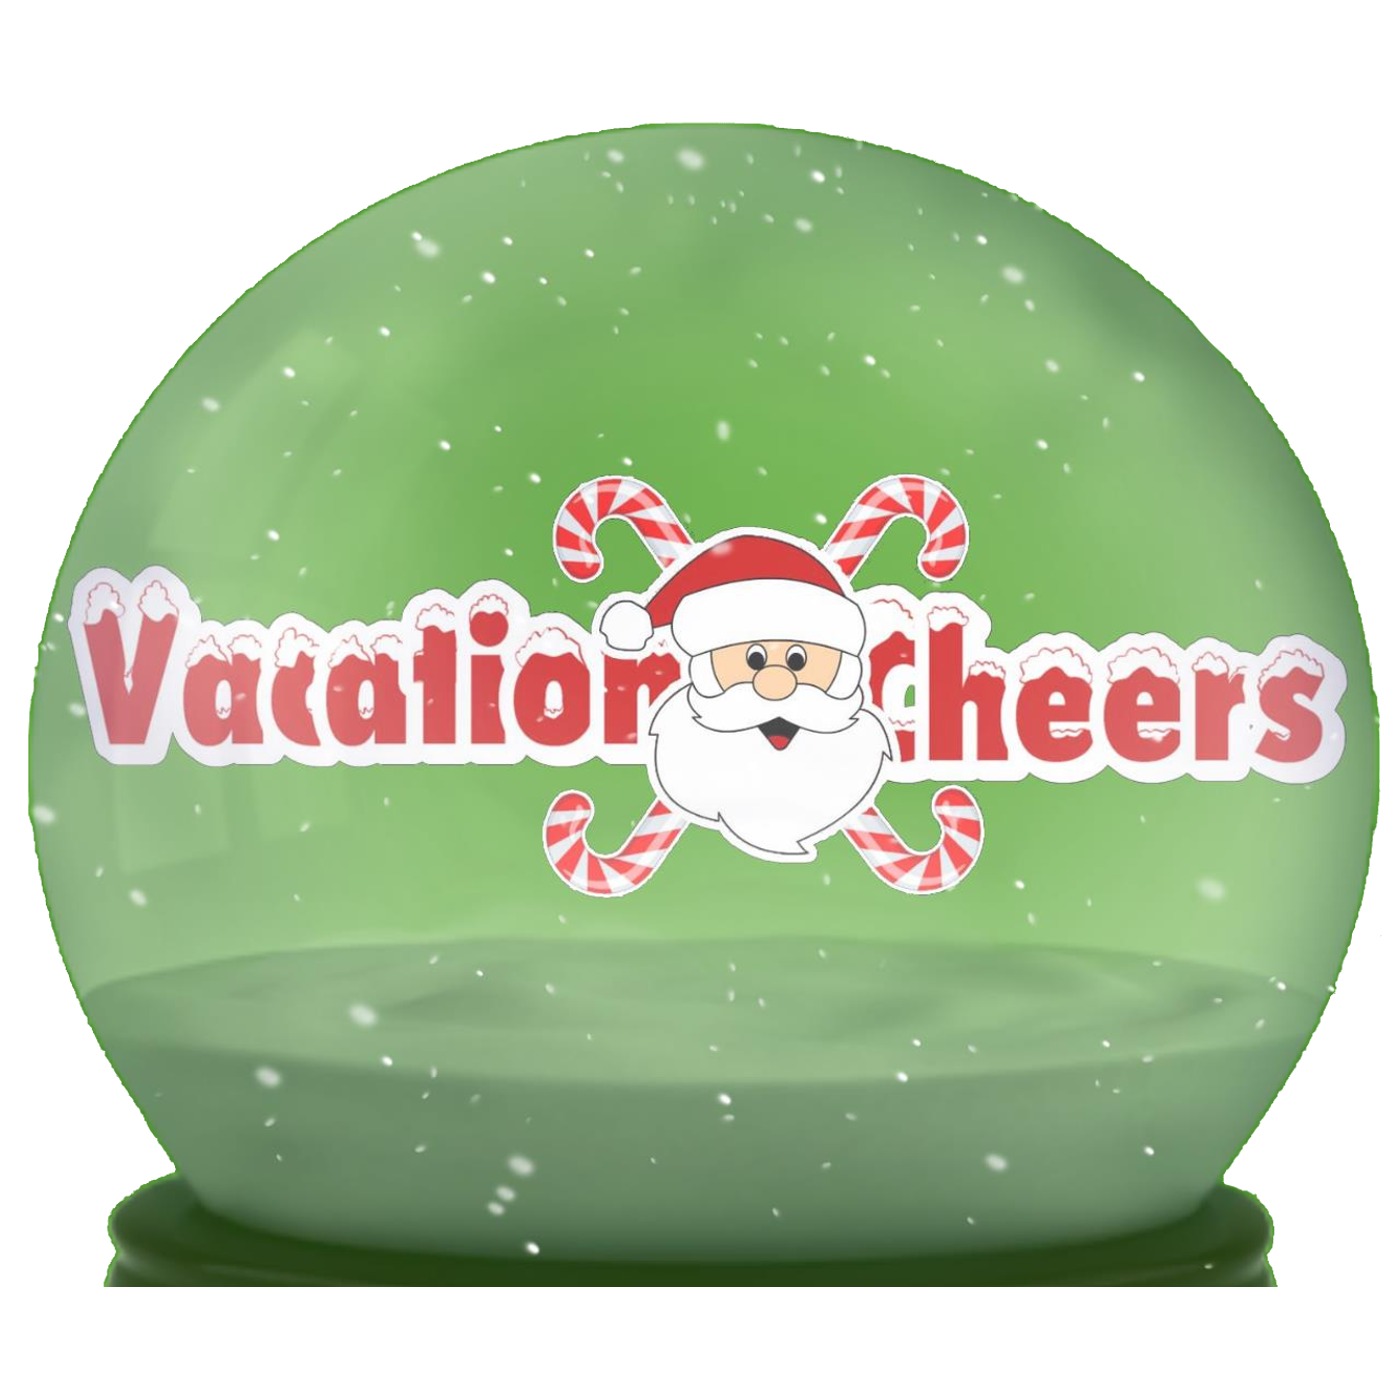 VacationCheers 163: Christmas at Gaylord Palms | ICE! Featuring Grinch & Cirque Show